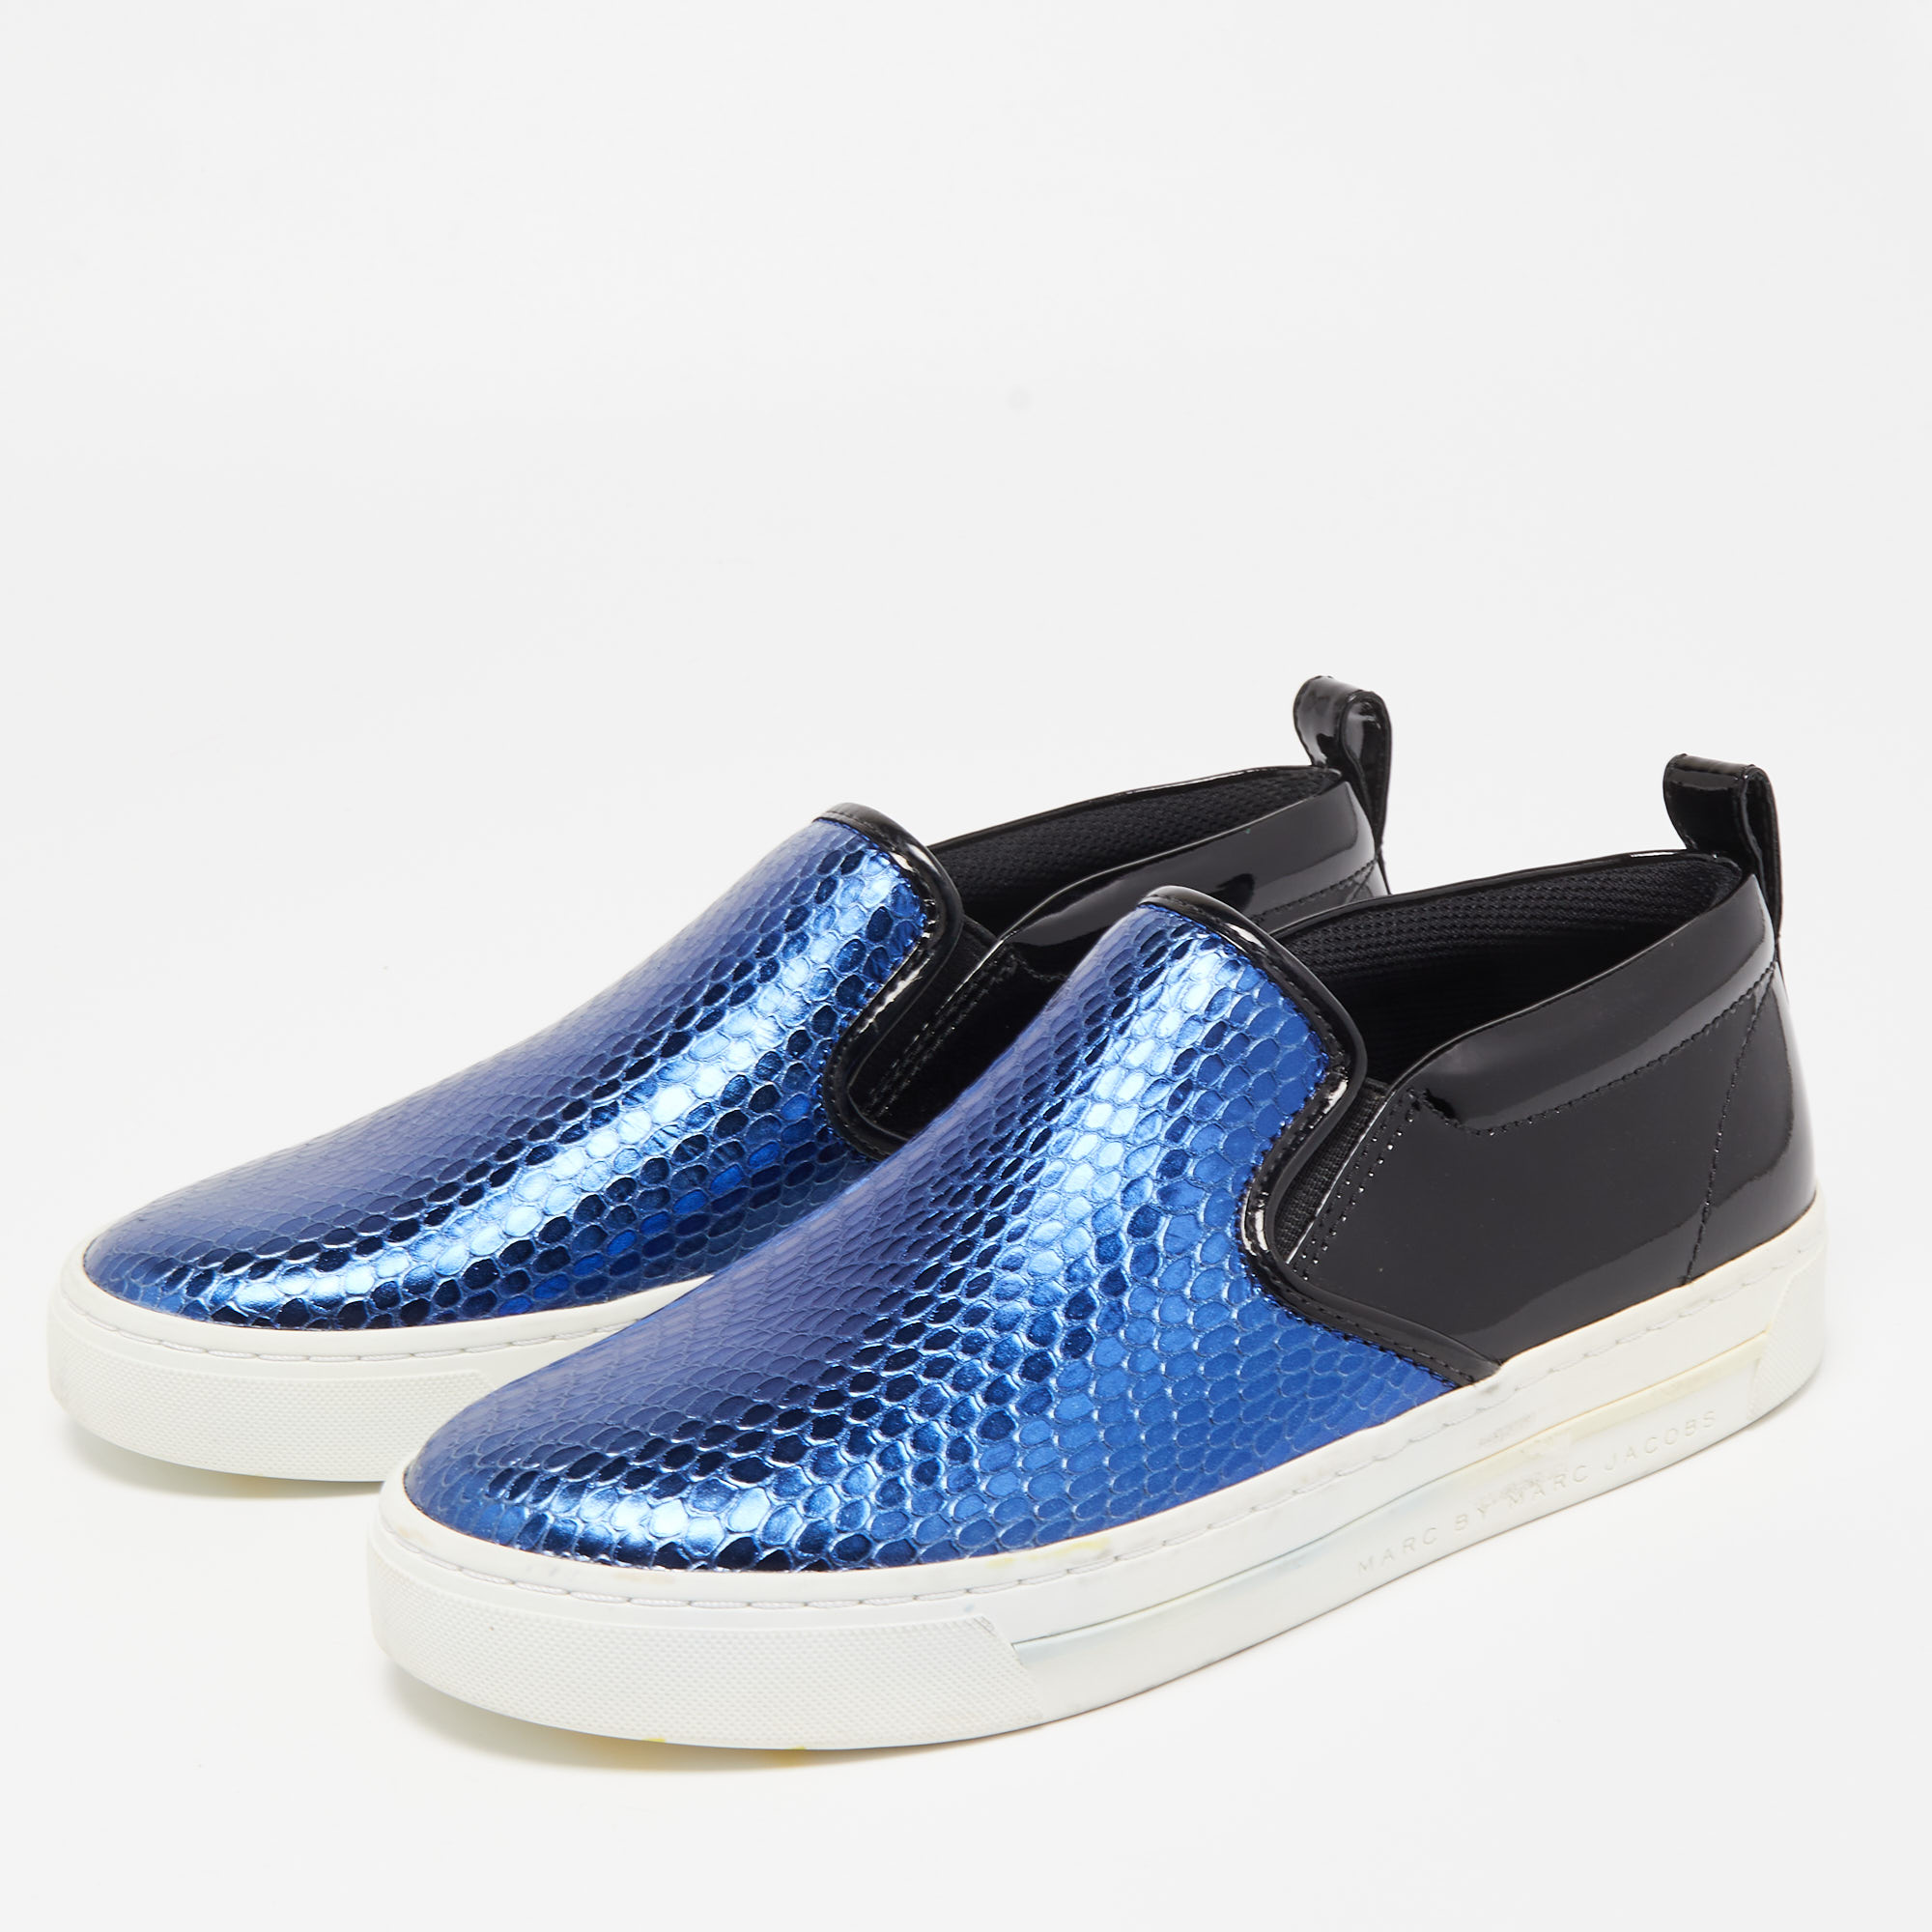 

Marc by Marc Jacobs Blue/Black Python Embossed Leather and Patent Broome Sneakers Size